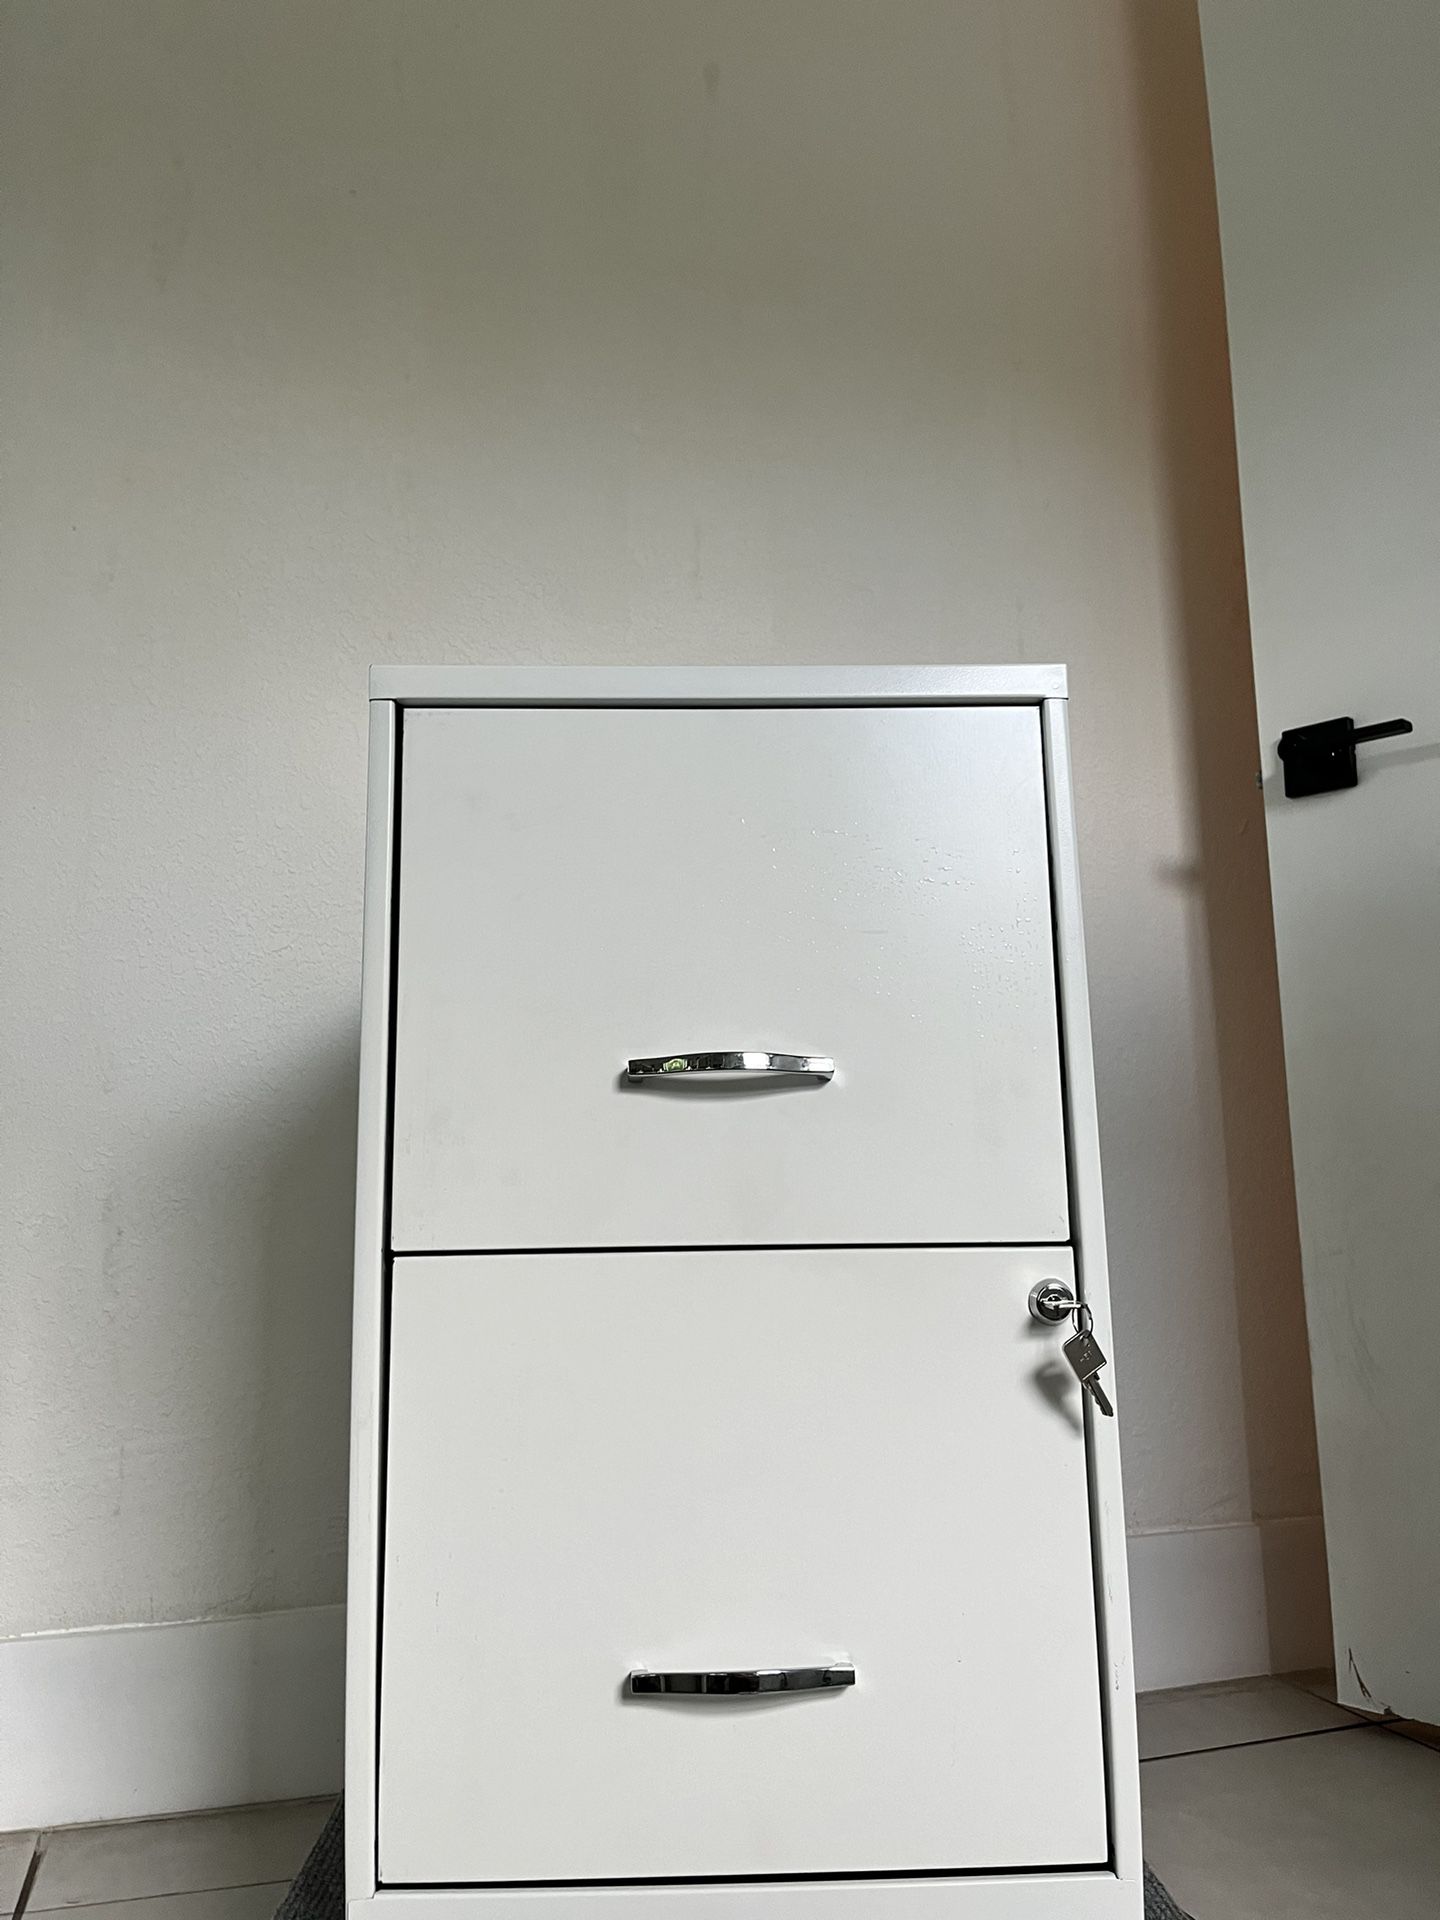 2-drawer white filing cabinet with keys